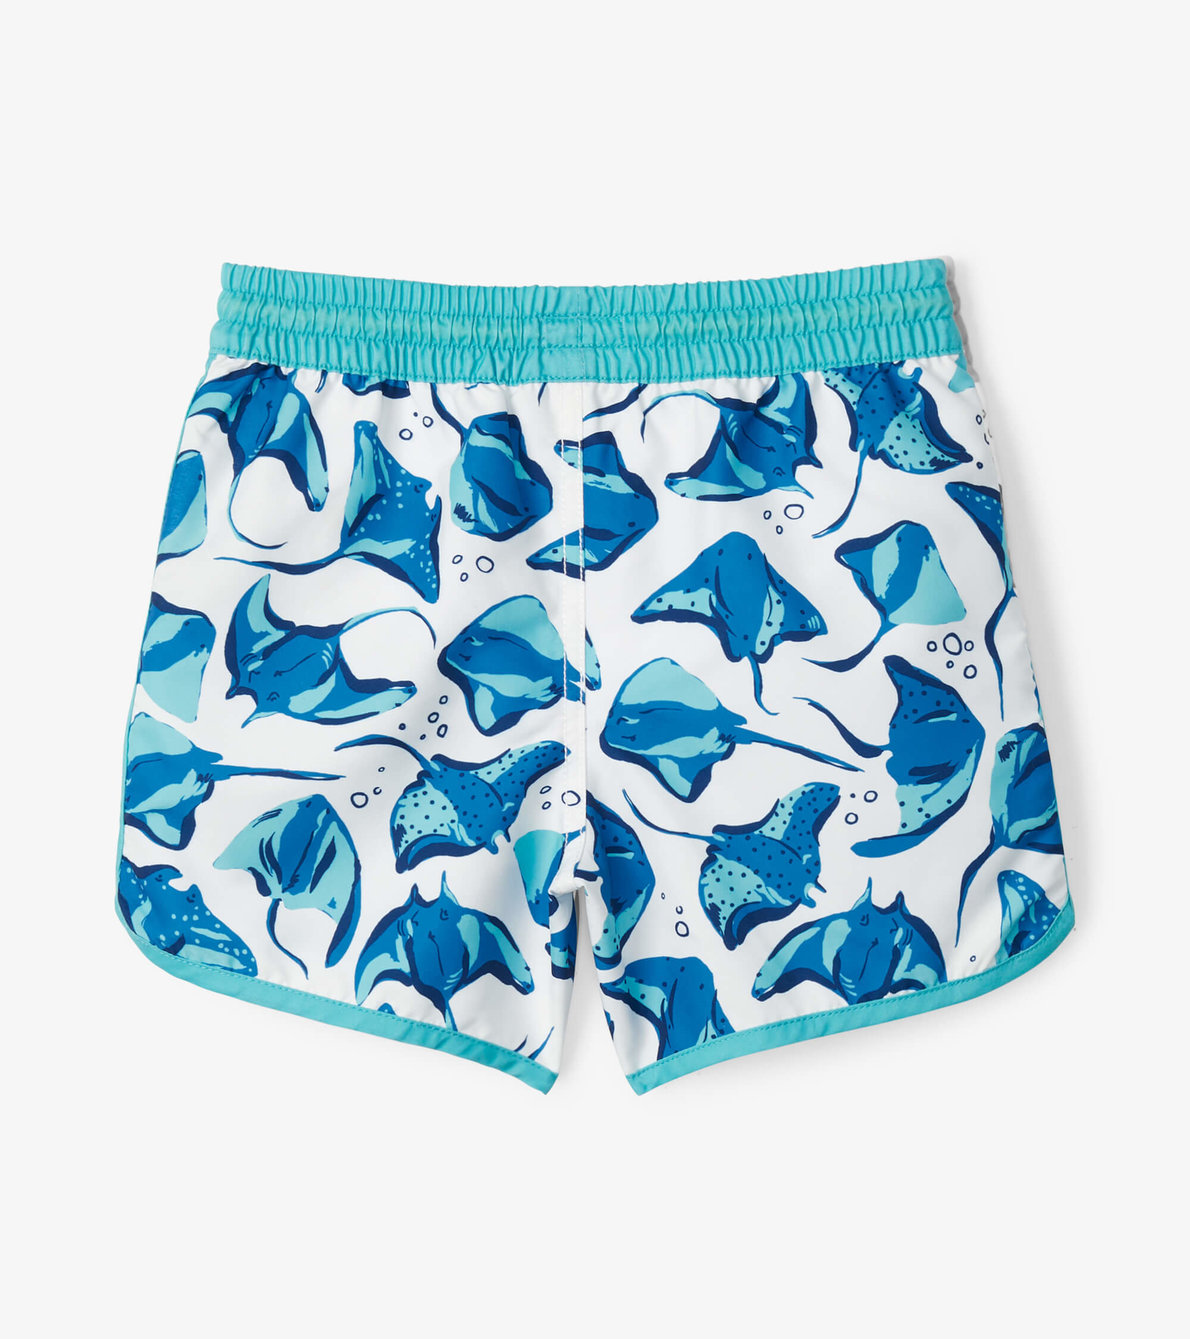 View larger image of Painted Sting Rays Swim Shorts